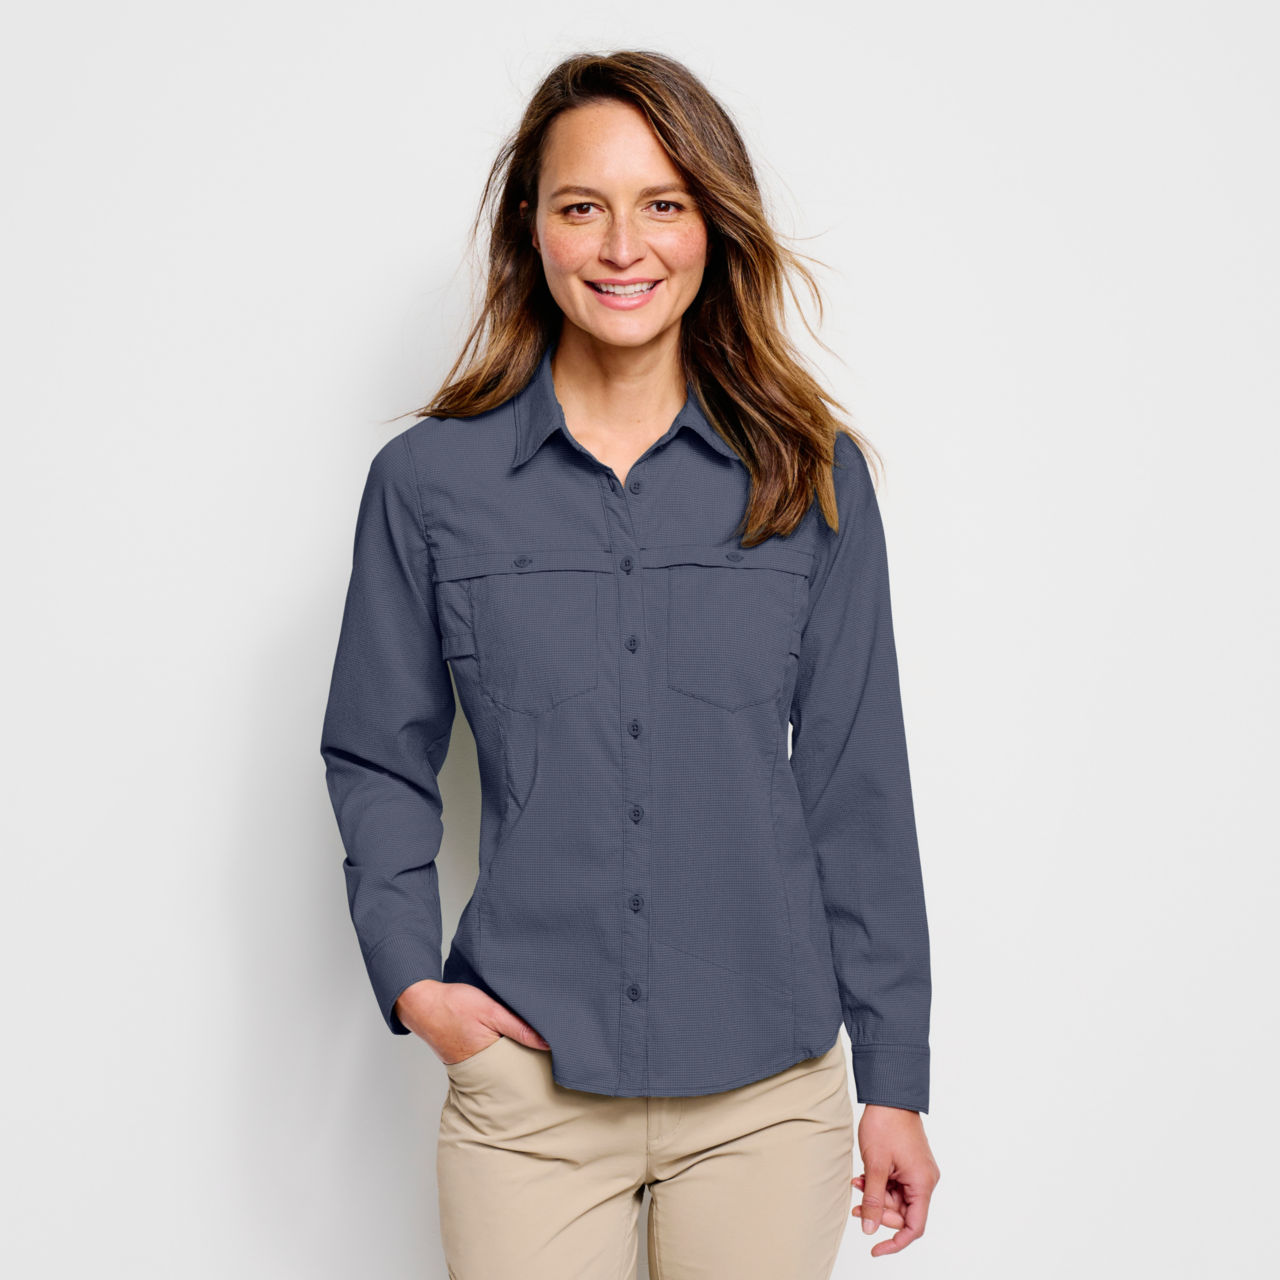 Women’s Open Air Caster Long-Sleeved Shirt - CARBON image number 0